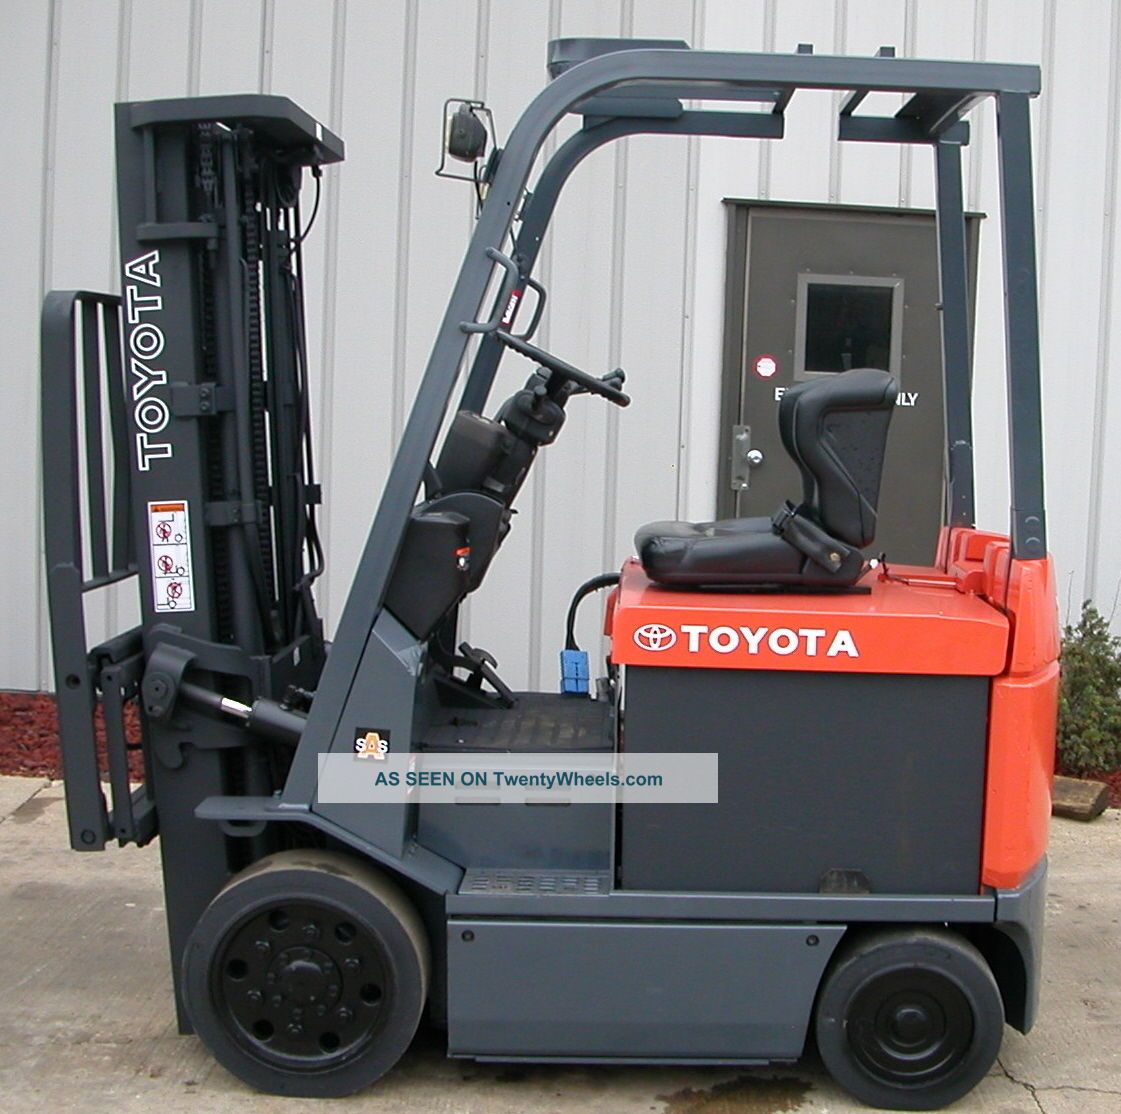 Toyota electric forklift specs